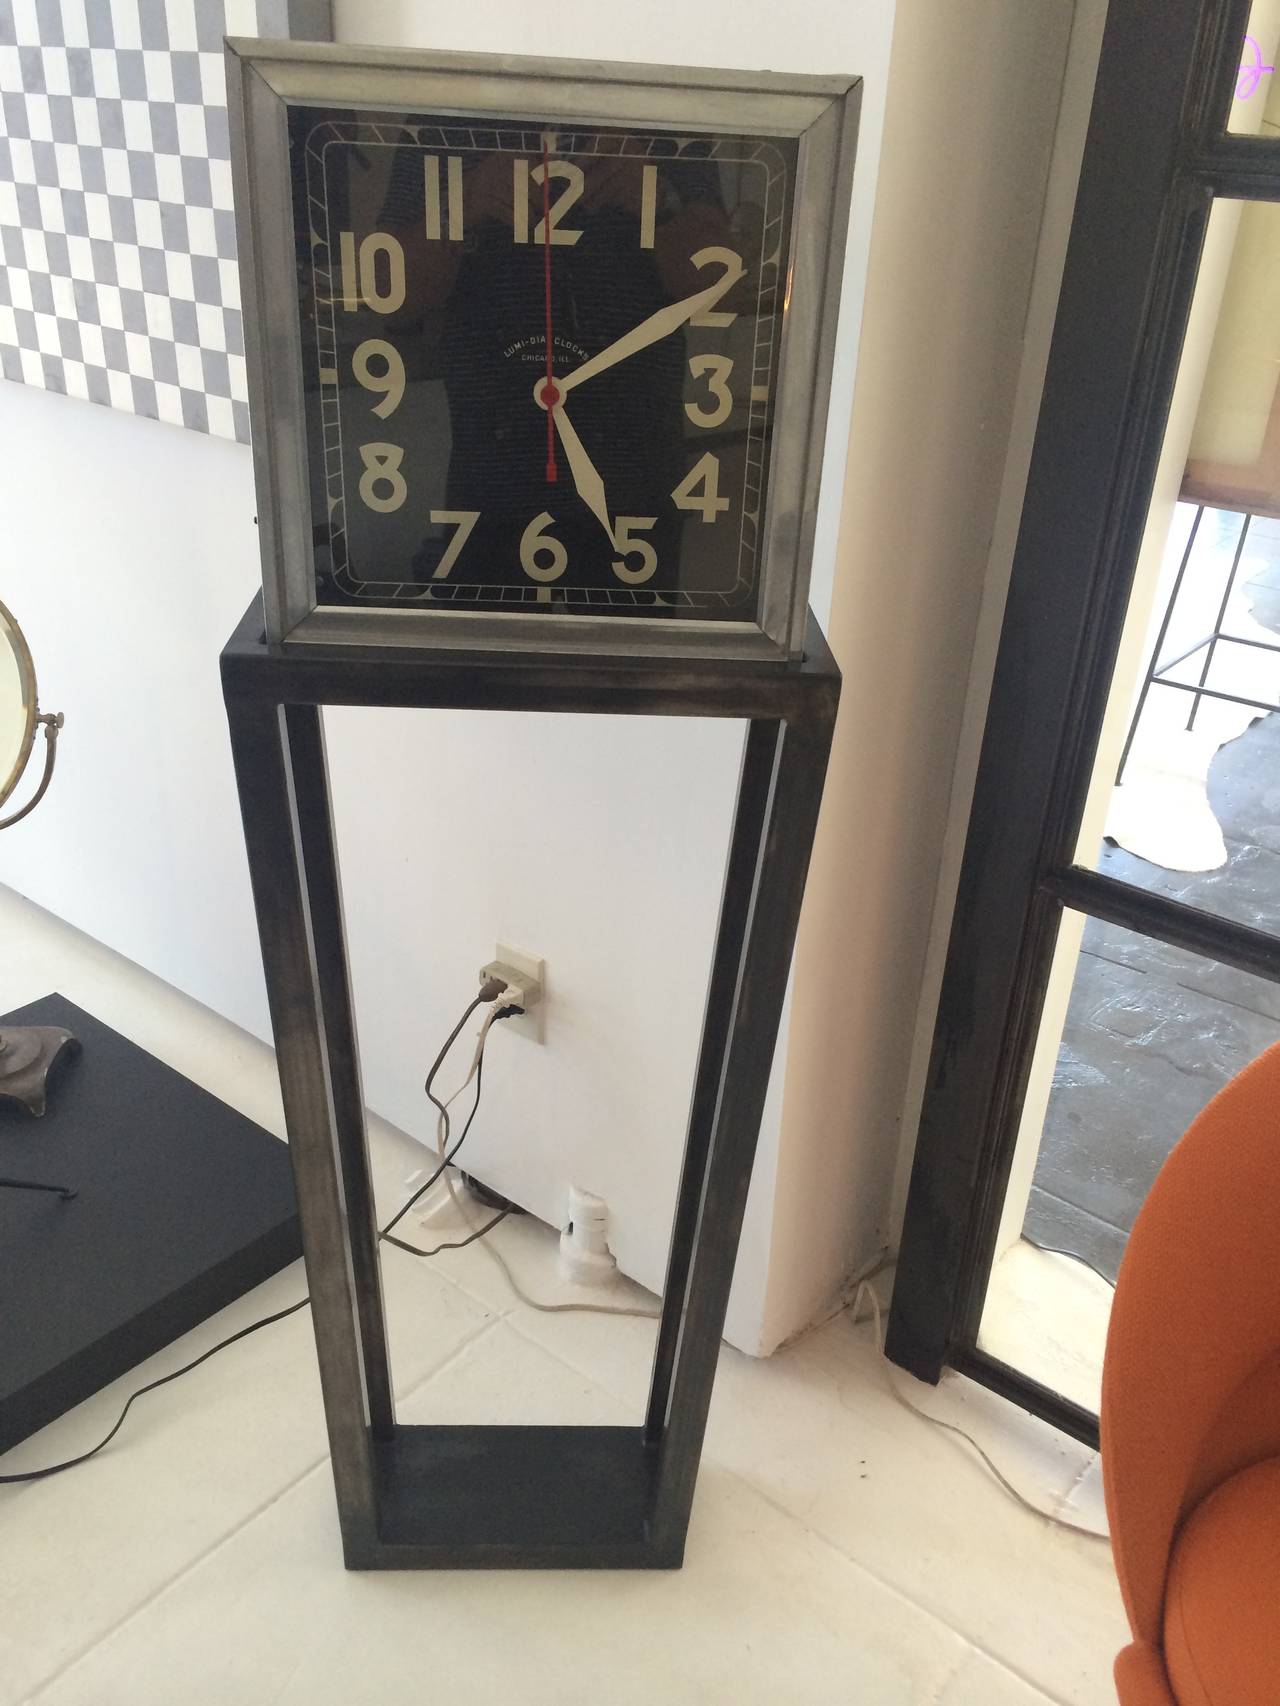 Most unique 1940s electric clock on architectural metal base.  Lumi-Dial Clocks, Chicago, ILL.